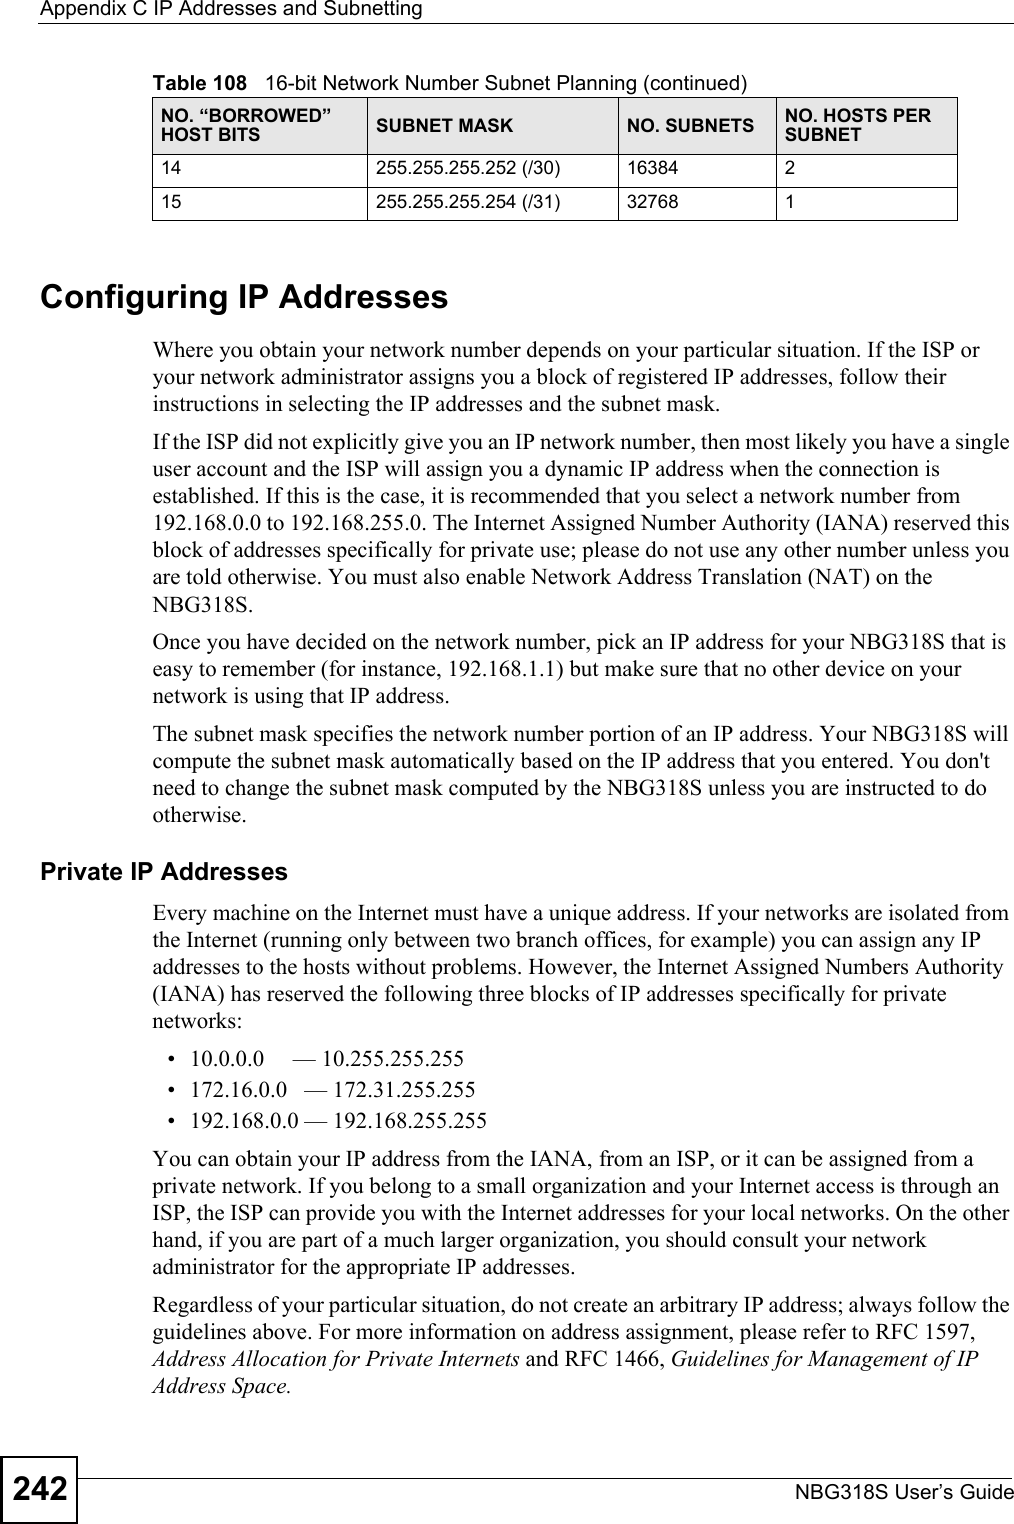 Appendix C IP Addresses and SubnettingNBG318S User’s Guide242Configuring IP AddressesWhere you obtain your network number depends on your particular situation. If the ISP or your network administrator assigns you a block of registered IP addresses, follow their instructions in selecting the IP addresses and the subnet mask.If the ISP did not explicitly give you an IP network number, then most likely you have a single user account and the ISP will assign you a dynamic IP address when the connection is established. If this is the case, it is recommended that you select a network number from 192.168.0.0 to 192.168.255.0. The Internet Assigned Number Authority (IANA) reserved this block of addresses specifically for private use; please do not use any other number unless you are told otherwise. You must also enable Network Address Translation (NAT) on the NBG318S. Once you have decided on the network number, pick an IP address for your NBG318S that is easy to remember (for instance, 192.168.1.1) but make sure that no other device on your network is using that IP address.The subnet mask specifies the network number portion of an IP address. Your NBG318S will compute the subnet mask automatically based on the IP address that you entered. You don&apos;t need to change the subnet mask computed by the NBG318S unless you are instructed to do otherwise.Private IP AddressesEvery machine on the Internet must have a unique address. If your networks are isolated from the Internet (running only between two branch offices, for example) you can assign any IP addresses to the hosts without problems. However, the Internet Assigned Numbers Authority (IANA) has reserved the following three blocks of IP addresses specifically for private networks:• 10.0.0.0     — 10.255.255.255• 172.16.0.0   — 172.31.255.255• 192.168.0.0 — 192.168.255.255You can obtain your IP address from the IANA, from an ISP, or it can be assigned from a private network. If you belong to a small organization and your Internet access is through an ISP, the ISP can provide you with the Internet addresses for your local networks. On the other hand, if you are part of a much larger organization, you should consult your network administrator for the appropriate IP addresses.Regardless of your particular situation, do not create an arbitrary IP address; always follow the guidelines above. For more information on address assignment, please refer to RFC 1597, Address Allocation for Private Internets and RFC 1466, Guidelines for Management of IP Address Space.14 255.255.255.252 (/30) 16384 215 255.255.255.254 (/31) 32768 1Table 108   16-bit Network Number Subnet Planning (continued)NO. “BORROWED” HOST BITS SUBNET MASK NO. SUBNETS NO. HOSTS PER SUBNET